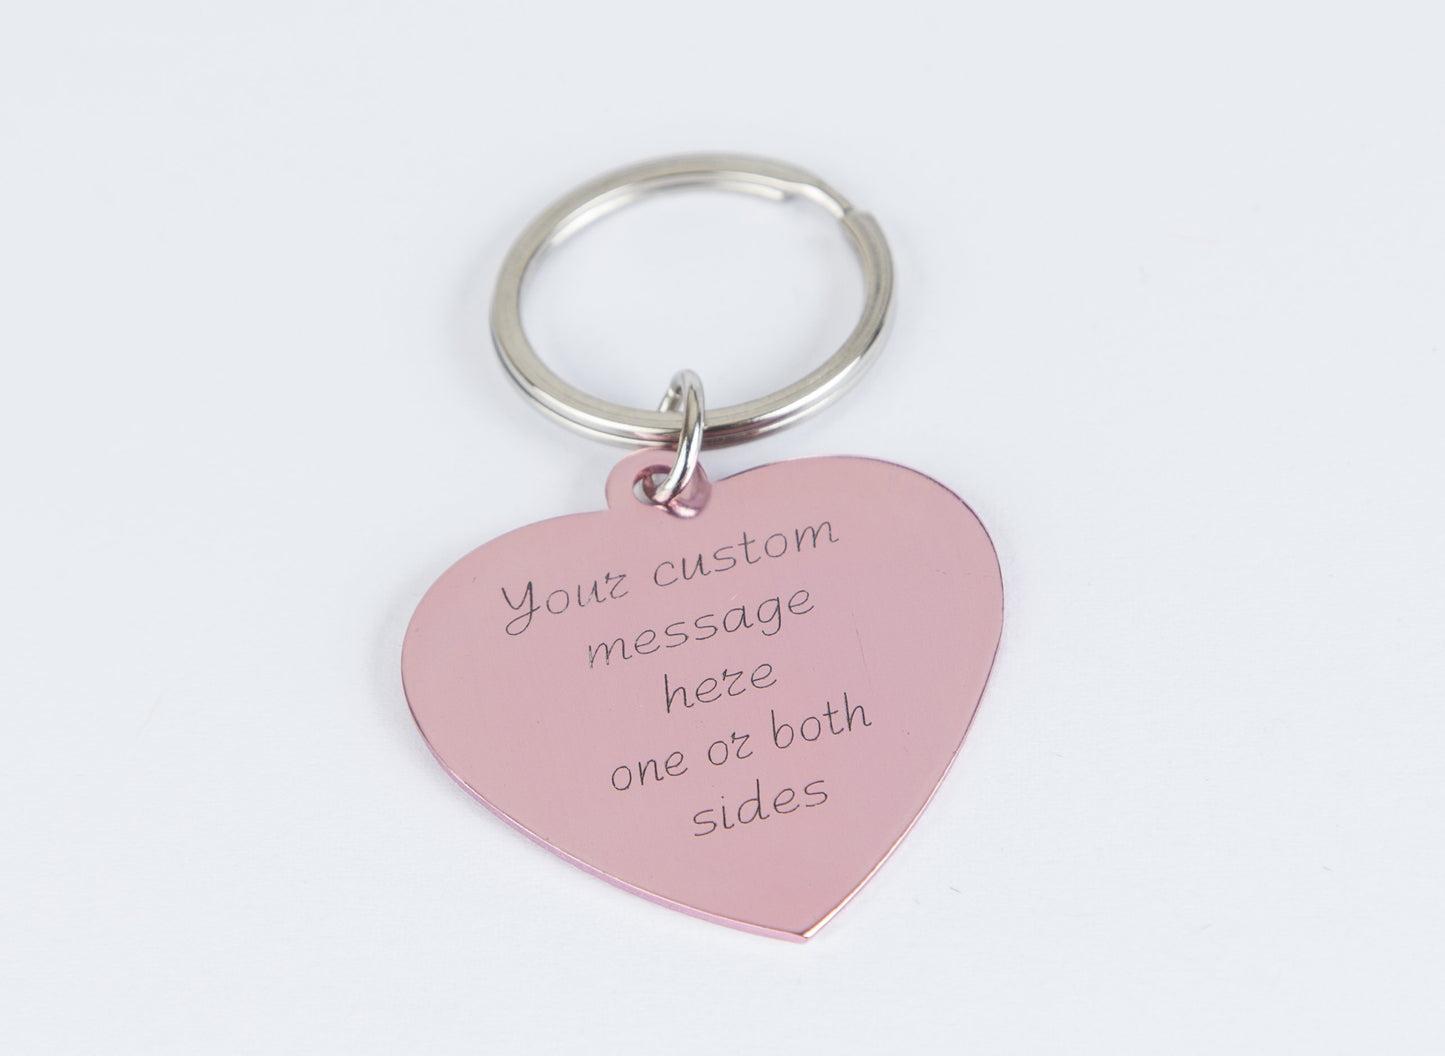 Personalized engraved pink heart keychain Custom gift girlfriend BFF